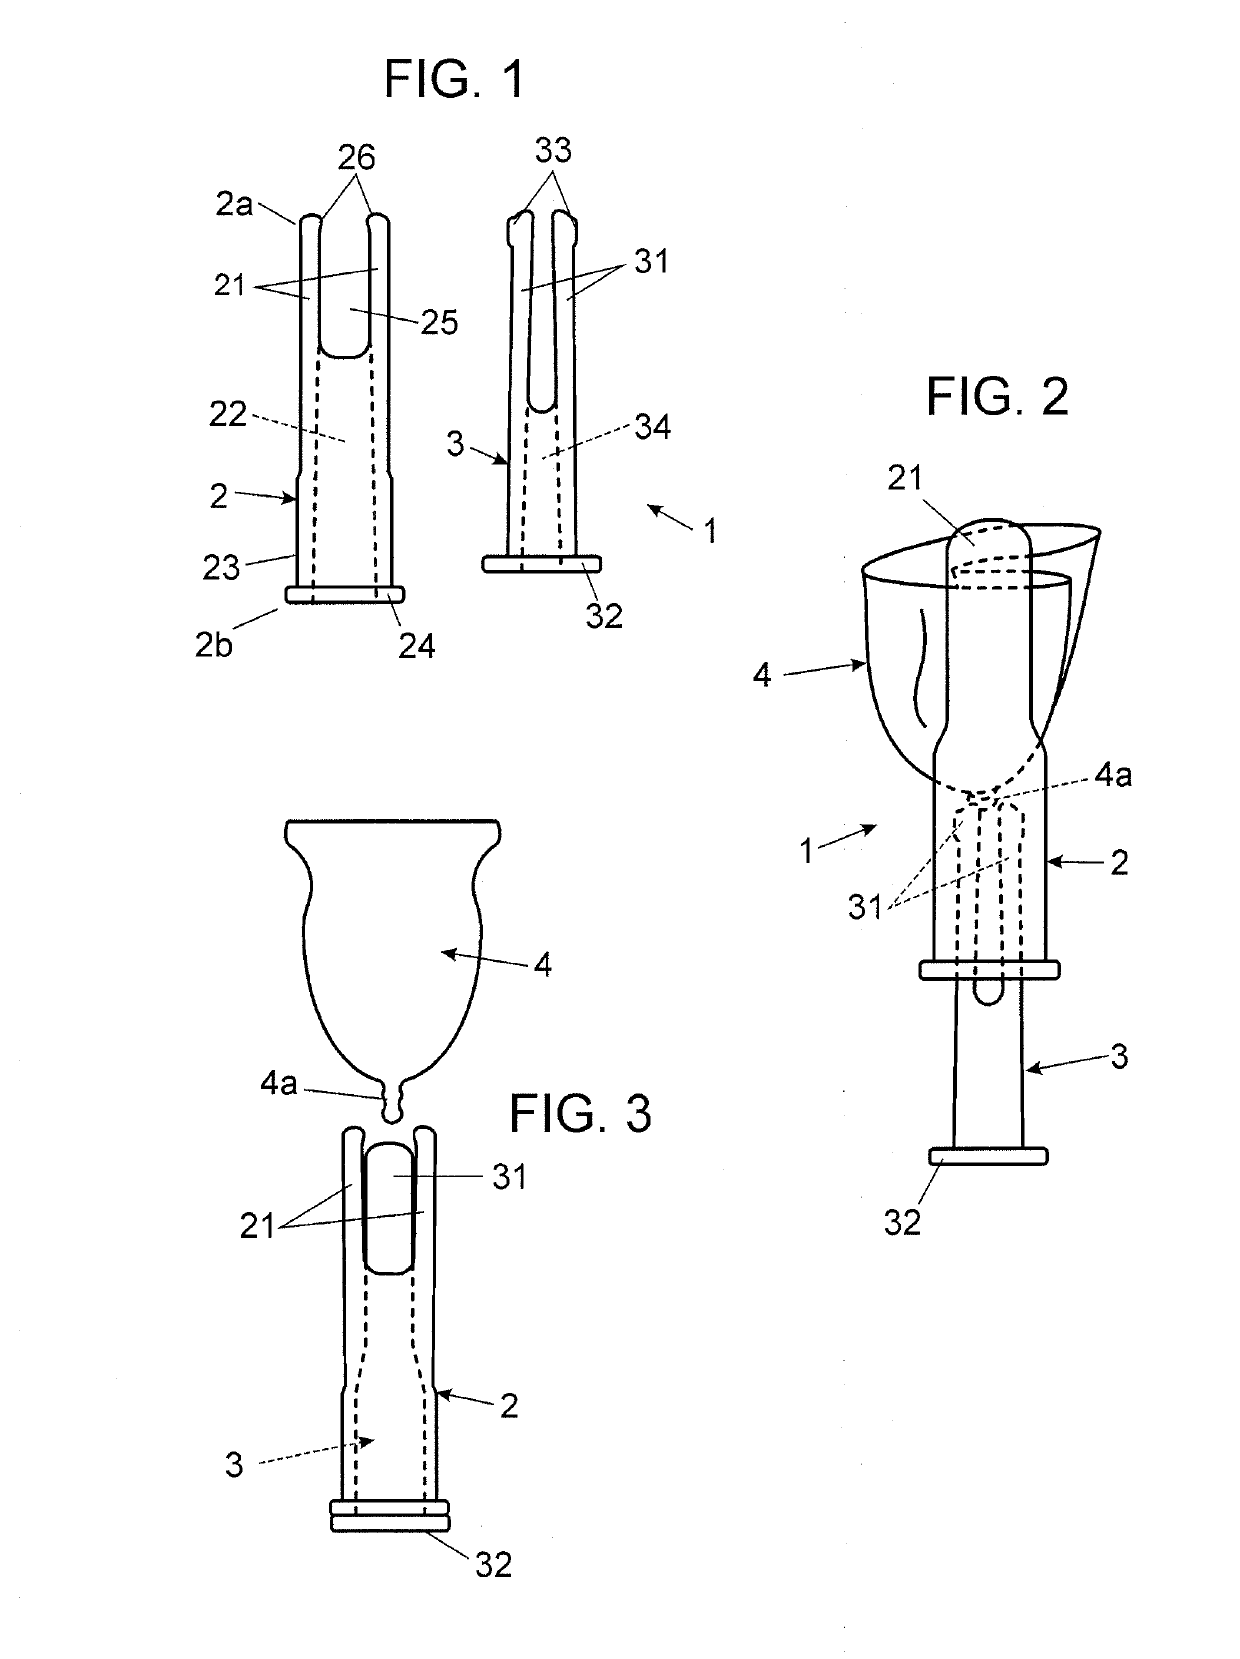 Applicator device for a menstrual cup